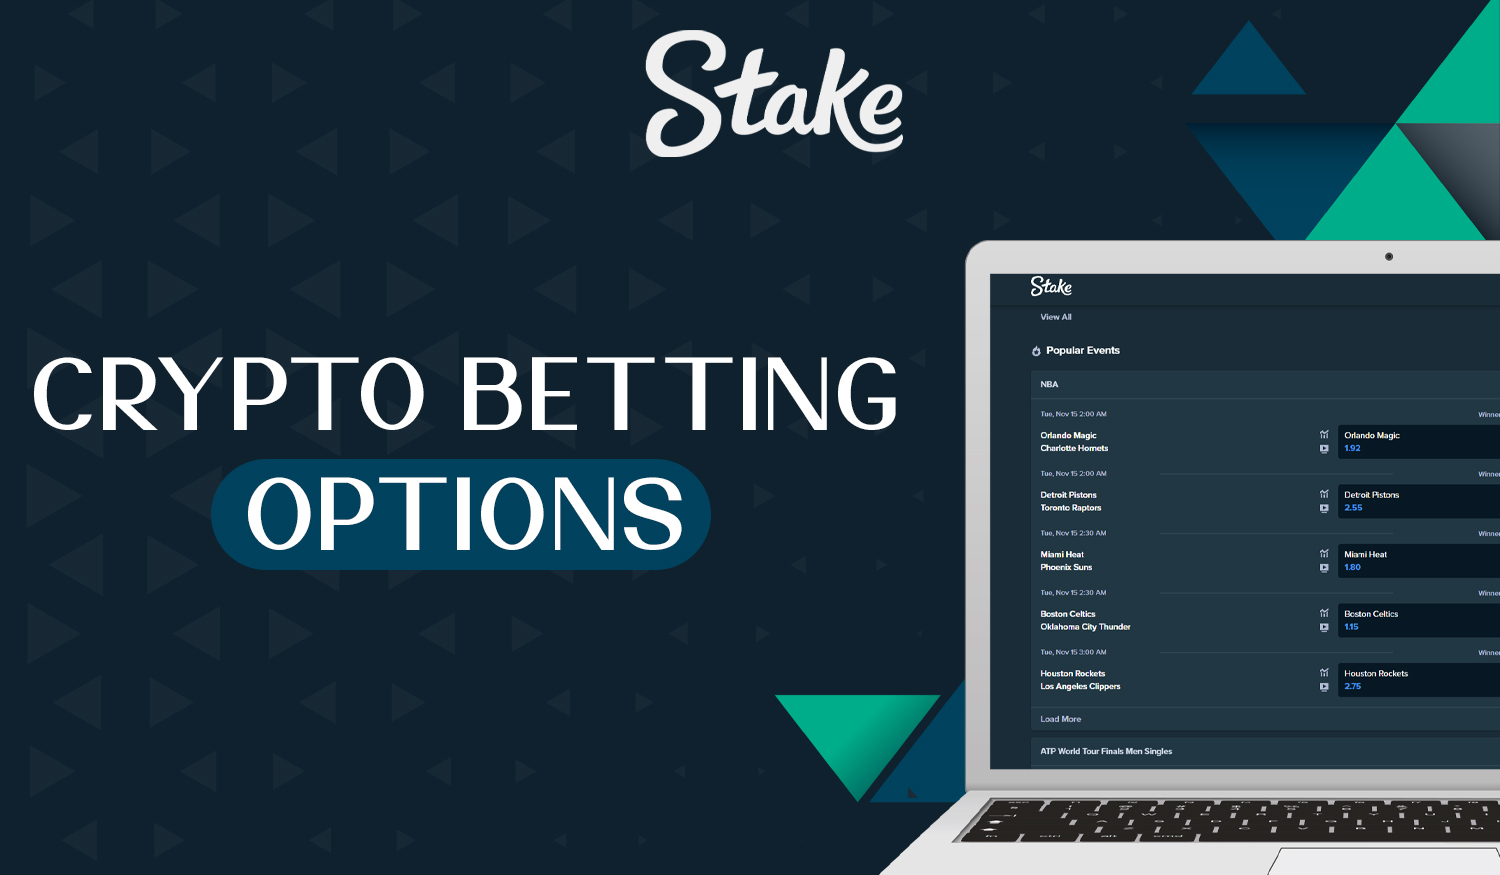 Which competitions does Stake have predictions on?